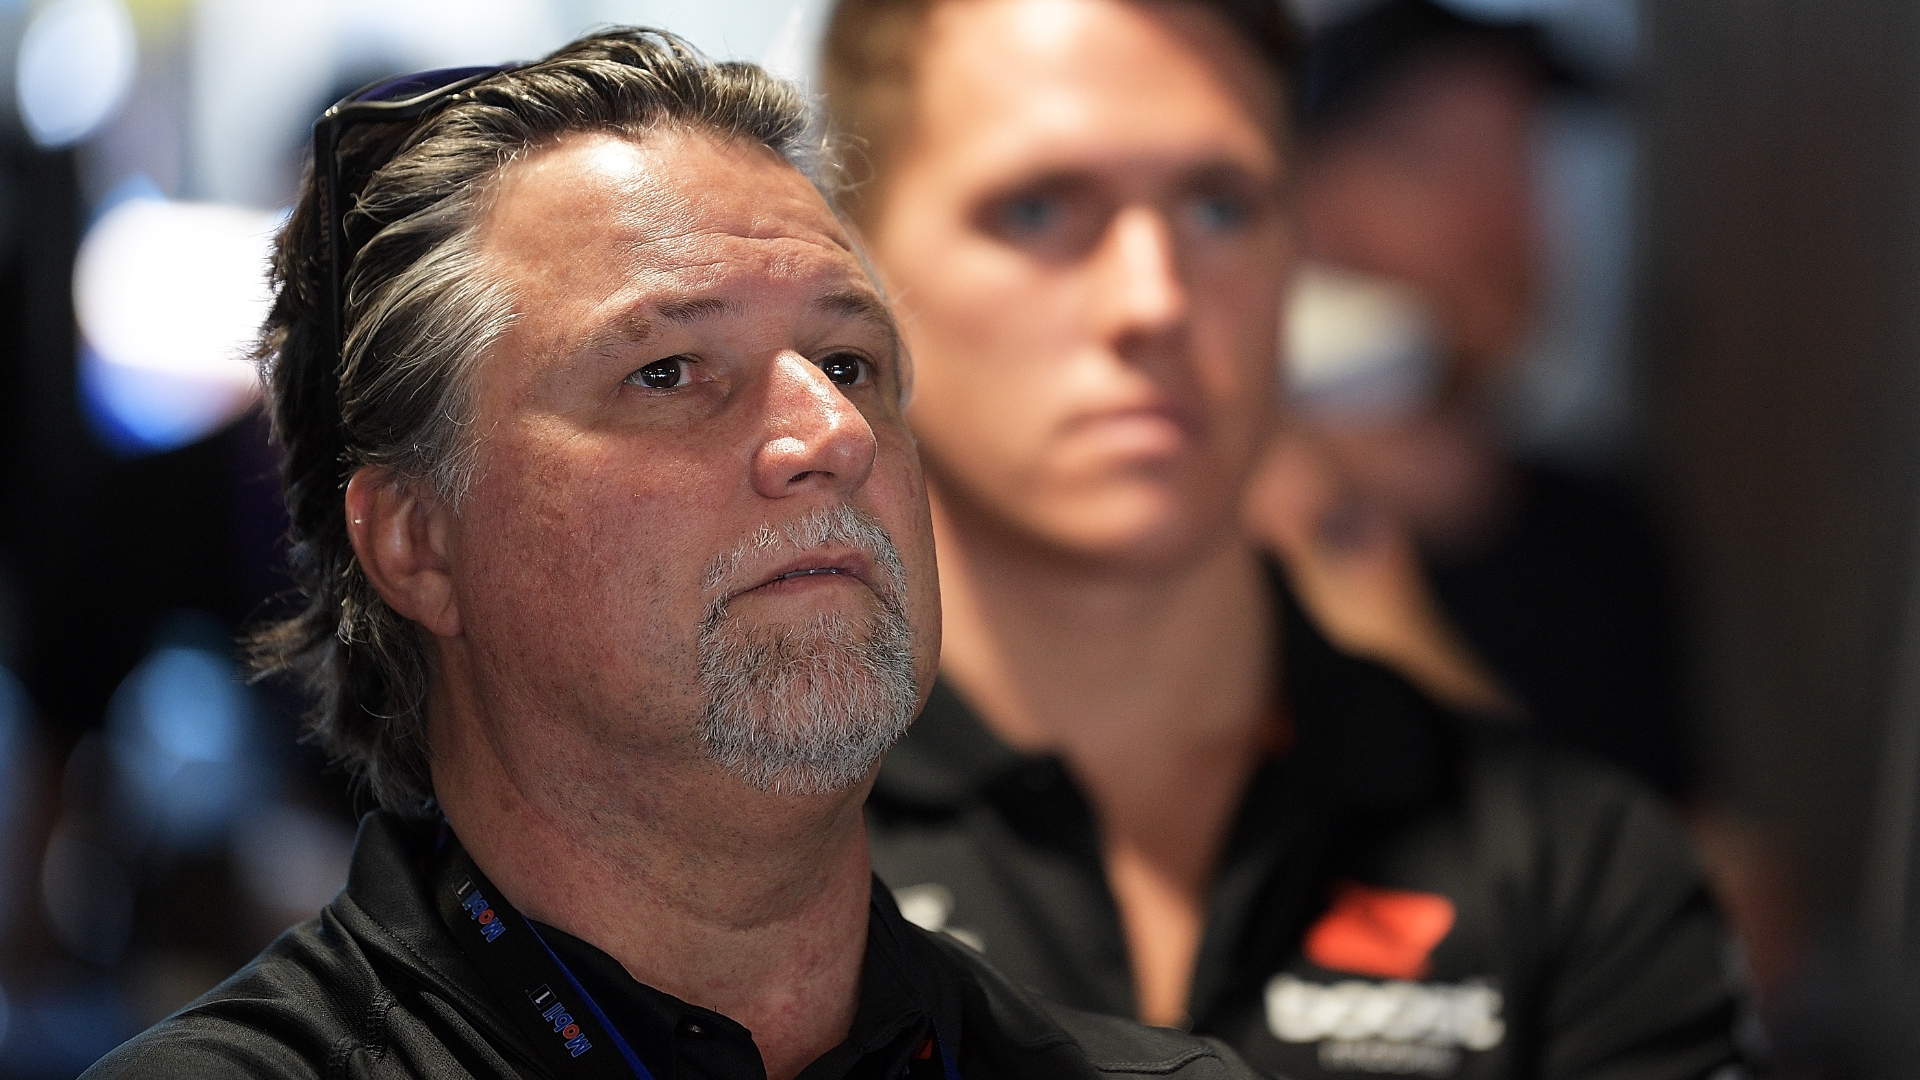 Should Andretti buy an existing team to be able to enter F1?